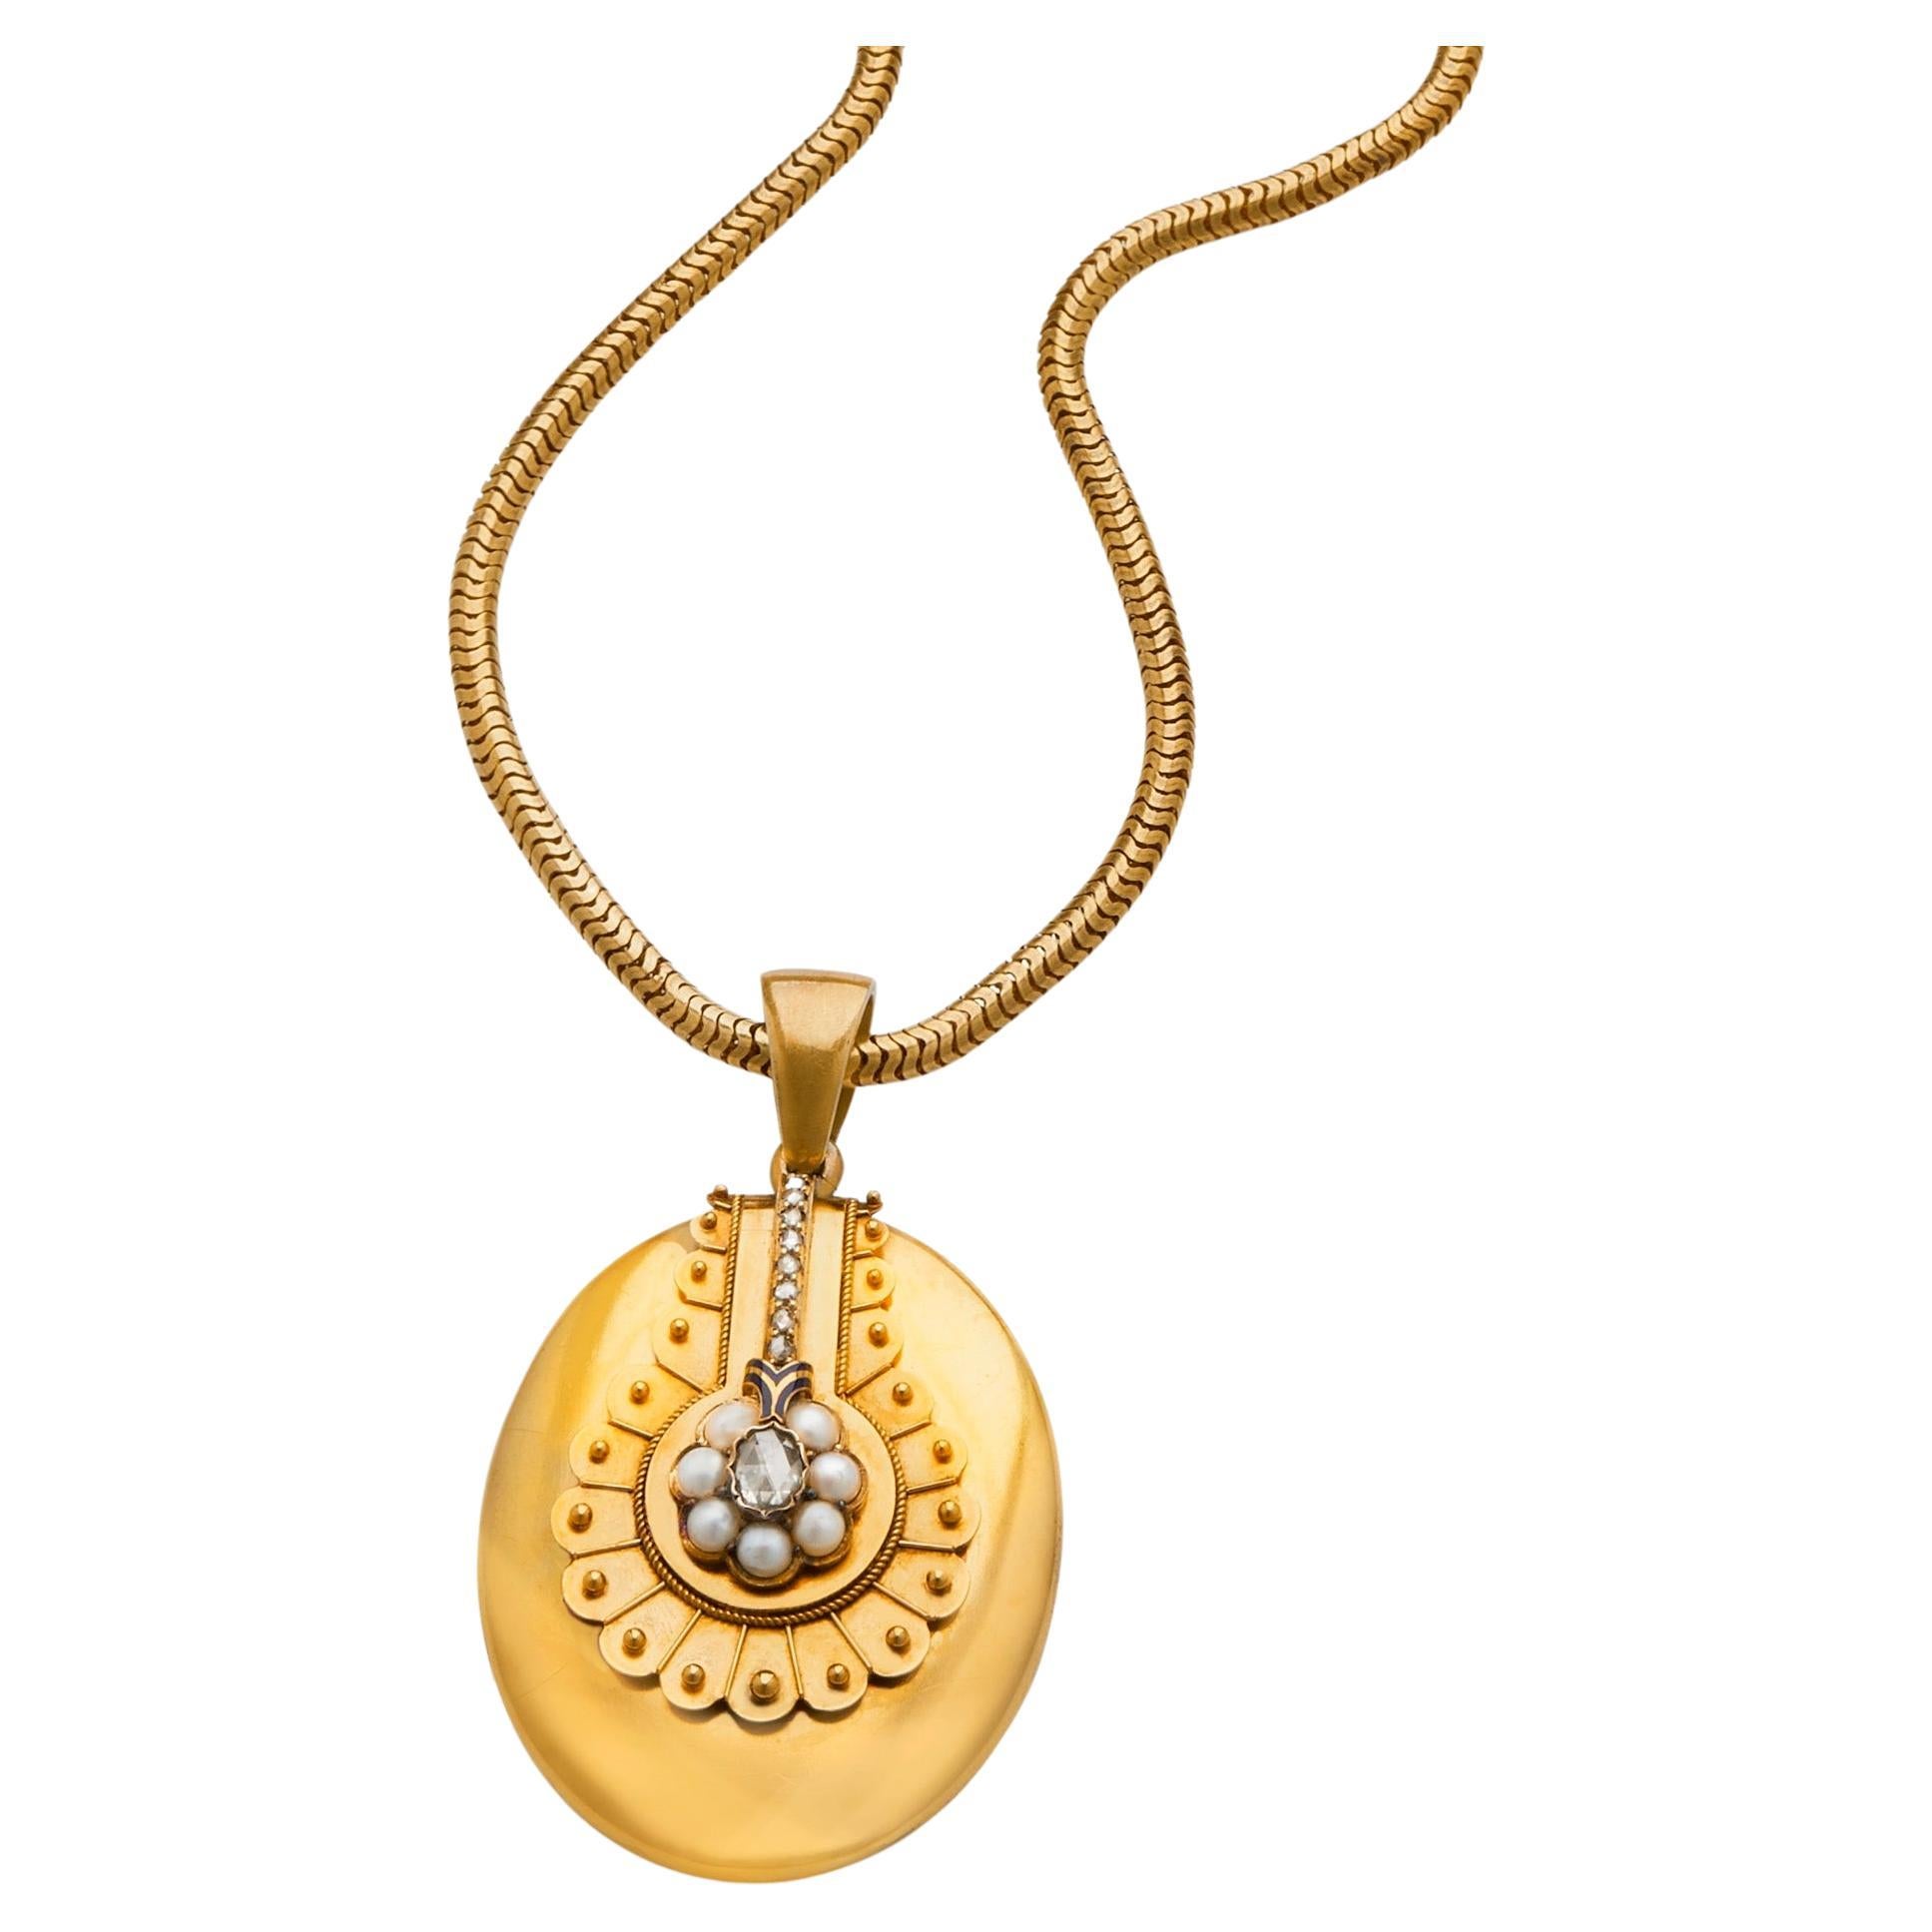 Bloomed Gold, Pearl and Diamond Locket Necklace with Snake Chain